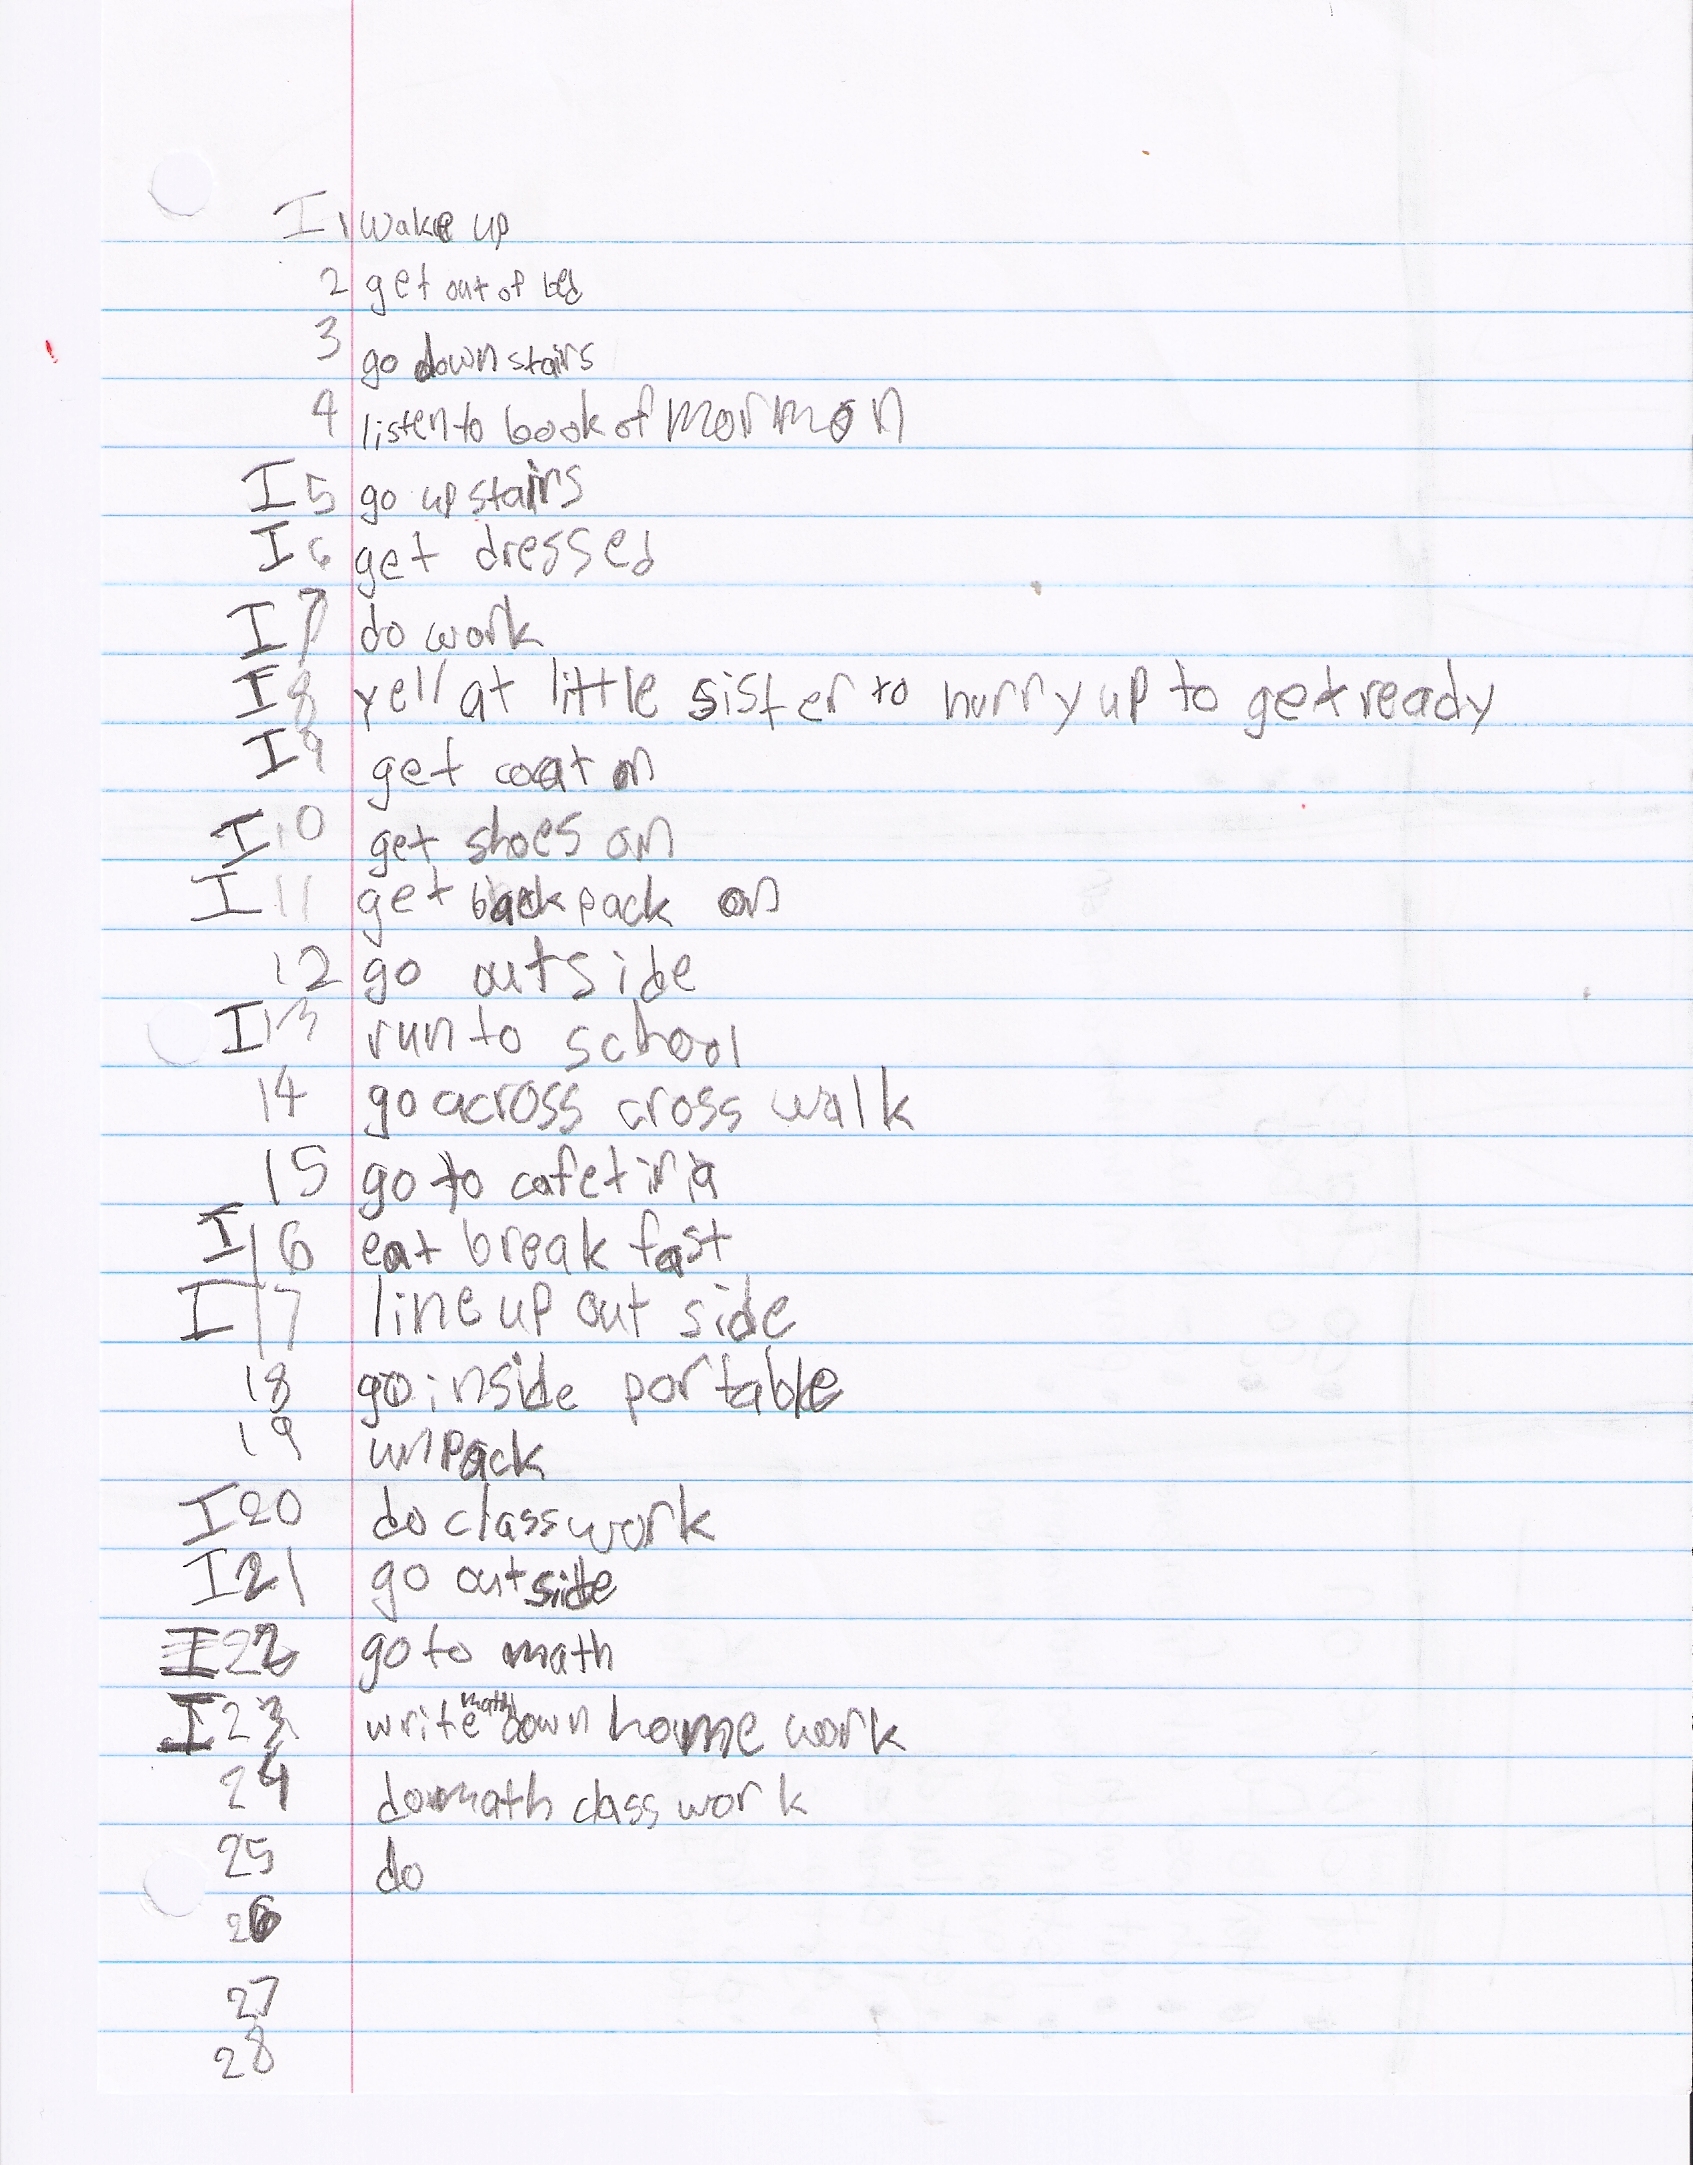 Nine-Year-old's to do list